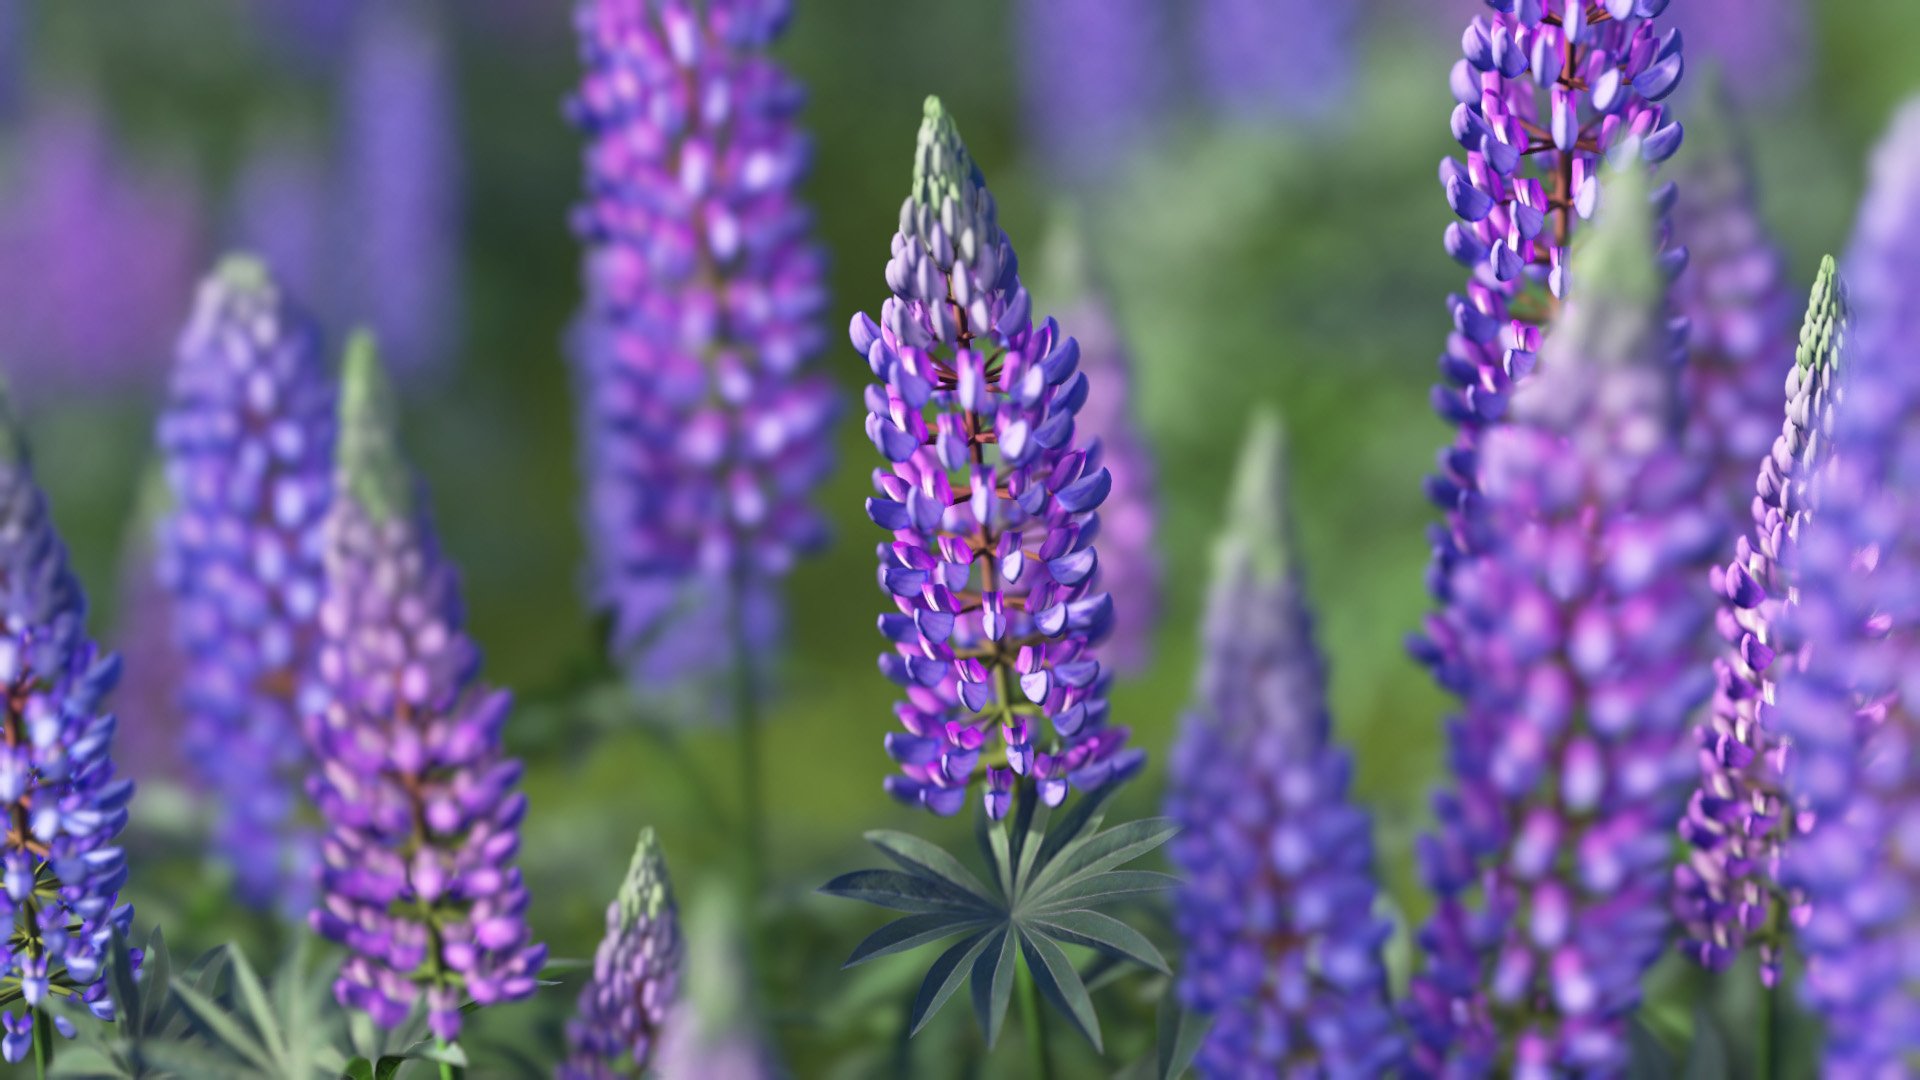 3D model of the Large-leaved lupine Lupinus polyphyllus close-up